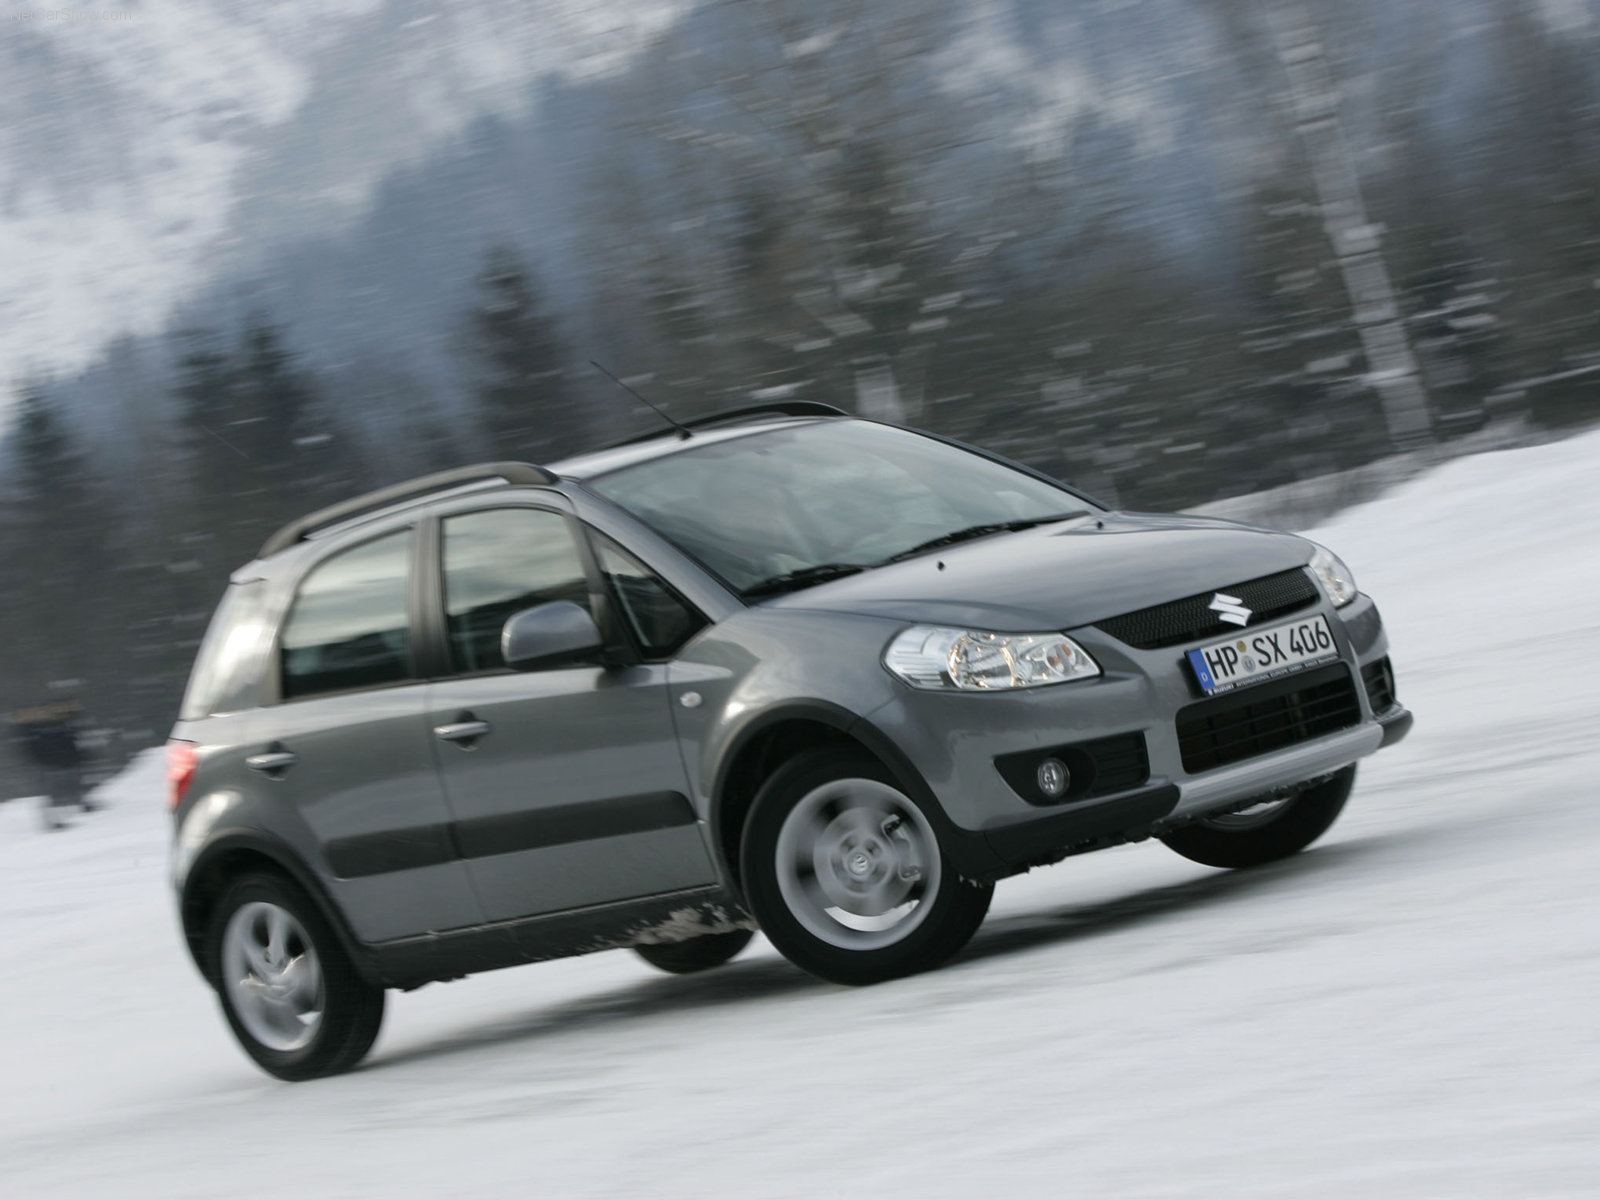 You can vote for this Suzuki SX4 photo